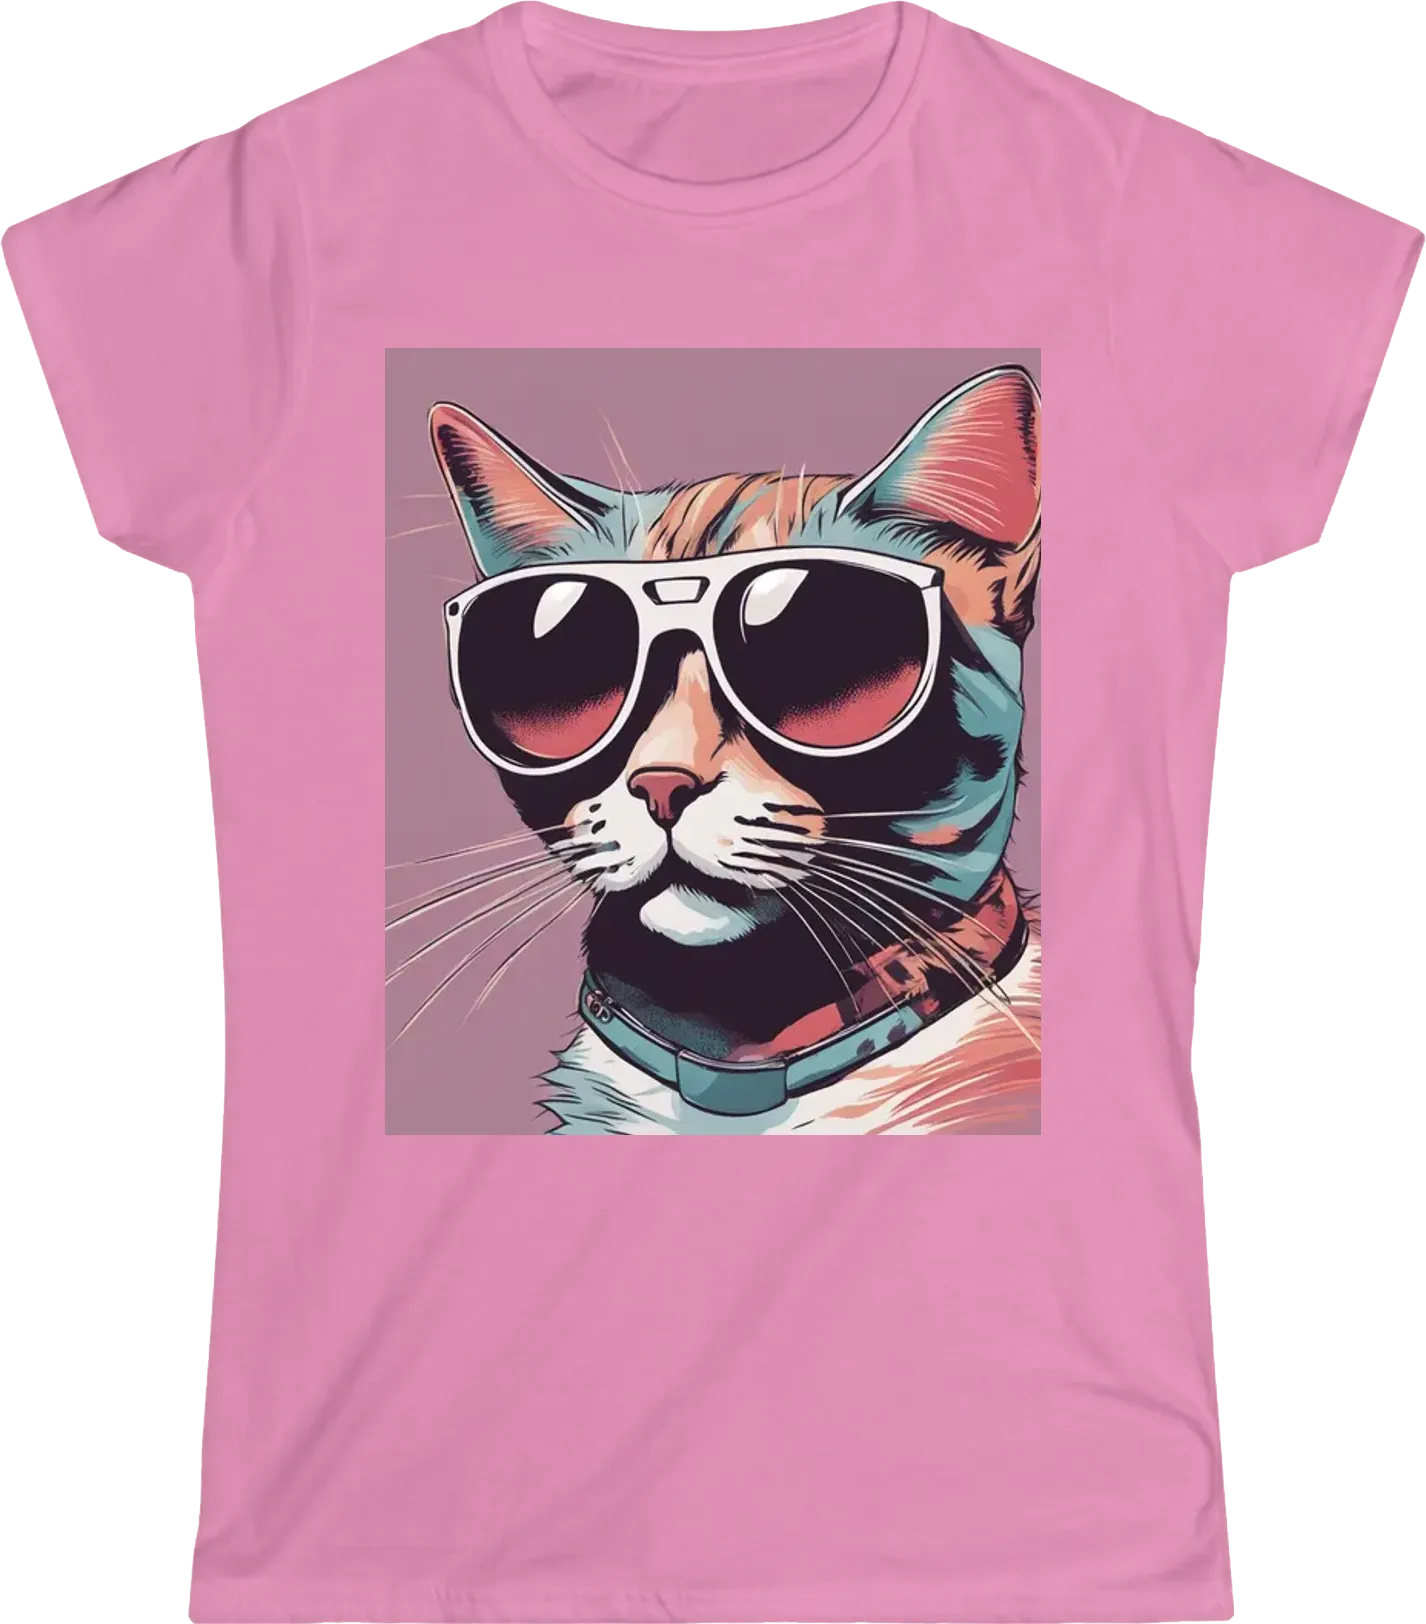 A quirky illustration of a cat wearing sunglasses